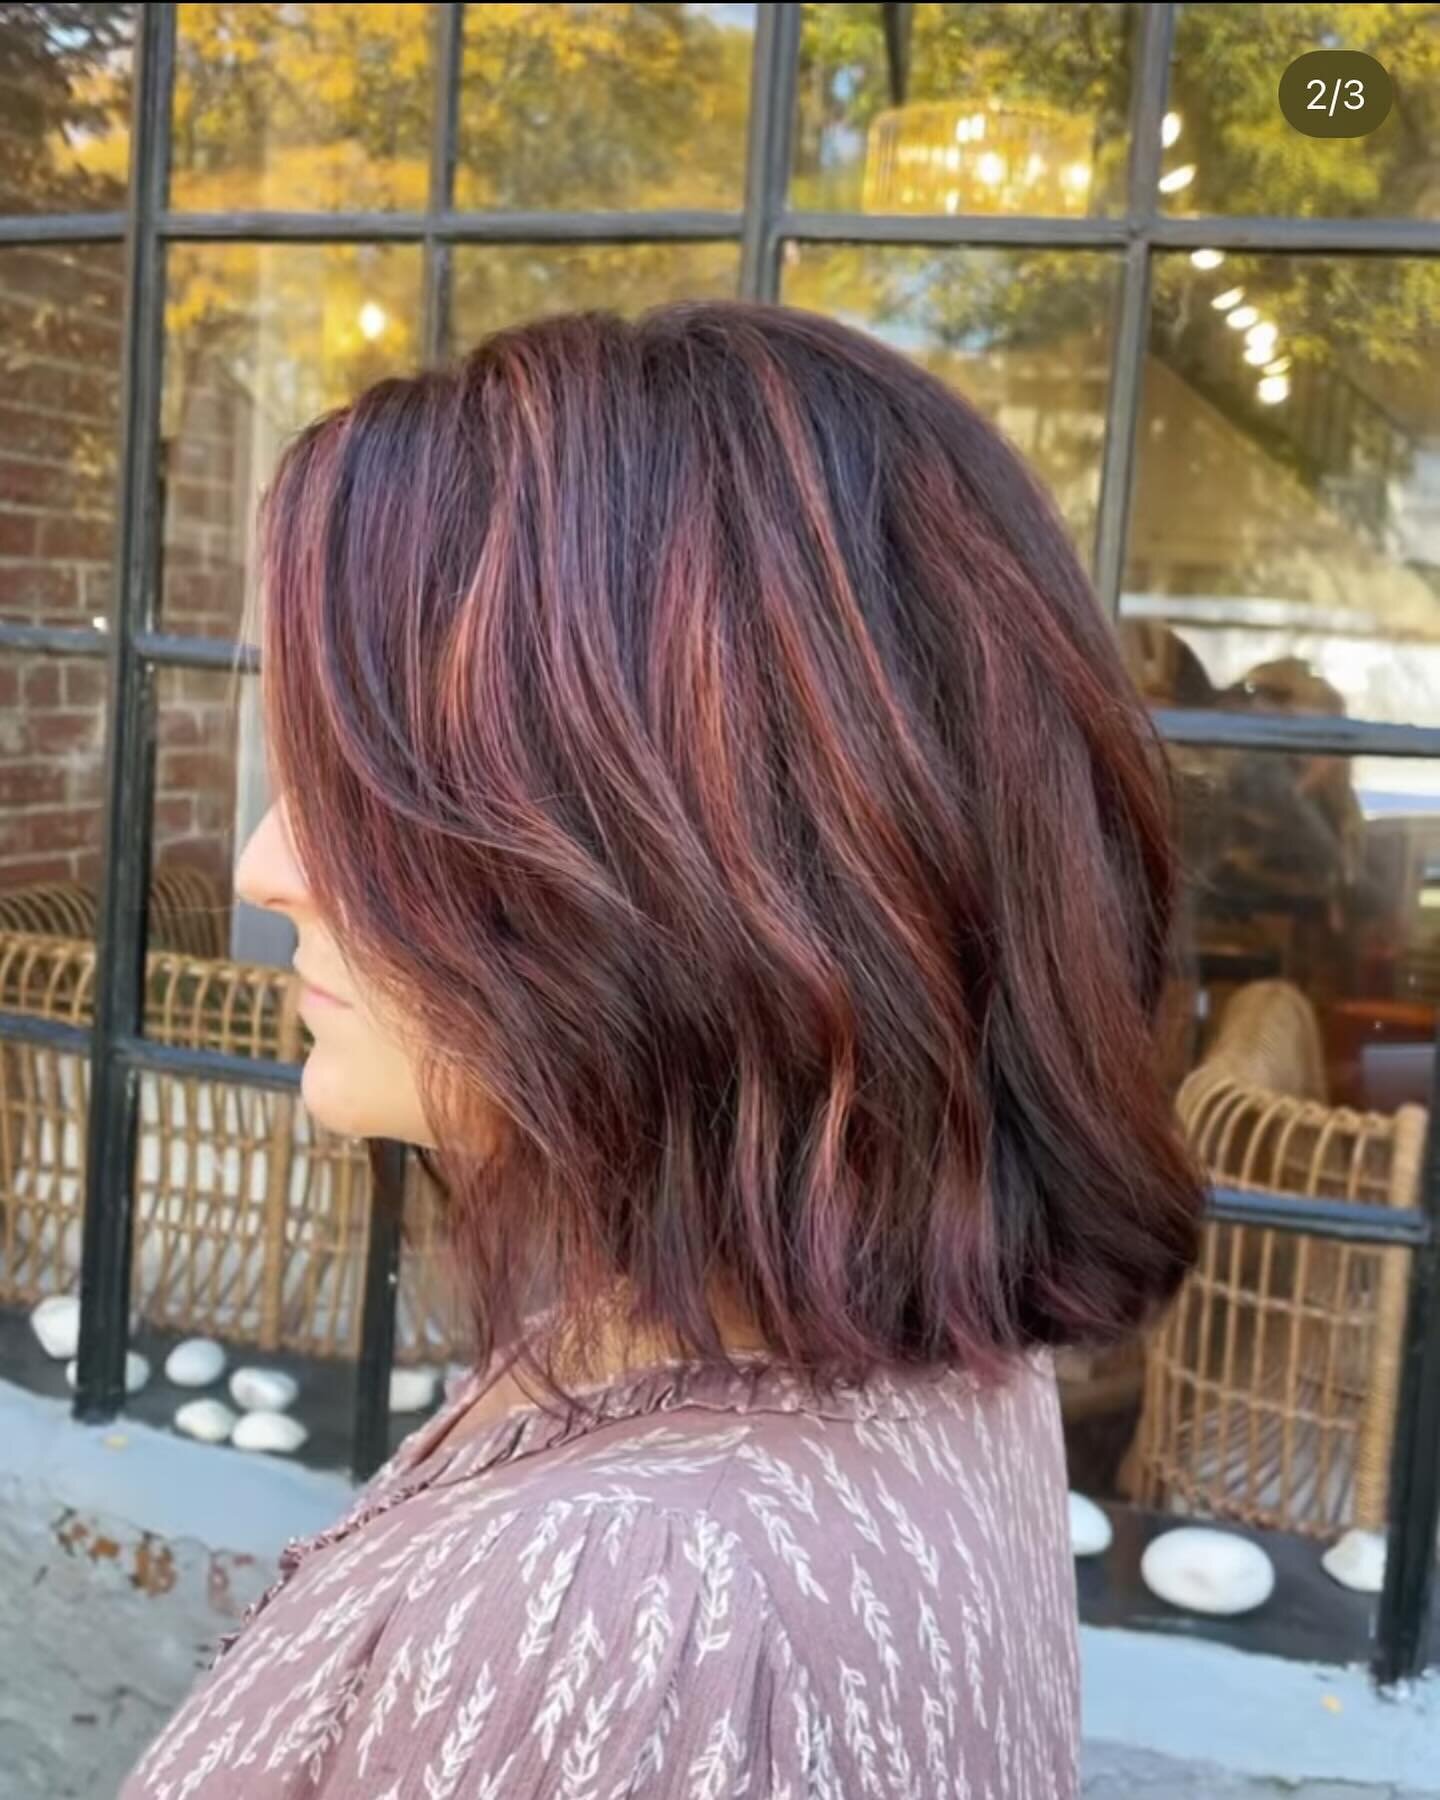 Blonde to burgundy and copper, because life's too short for just one shade! 🌟🍷🔥 Hair by: @beccalynn_latuabella #ColorfulTransformation #BurgundyBeauty #CopperCraze